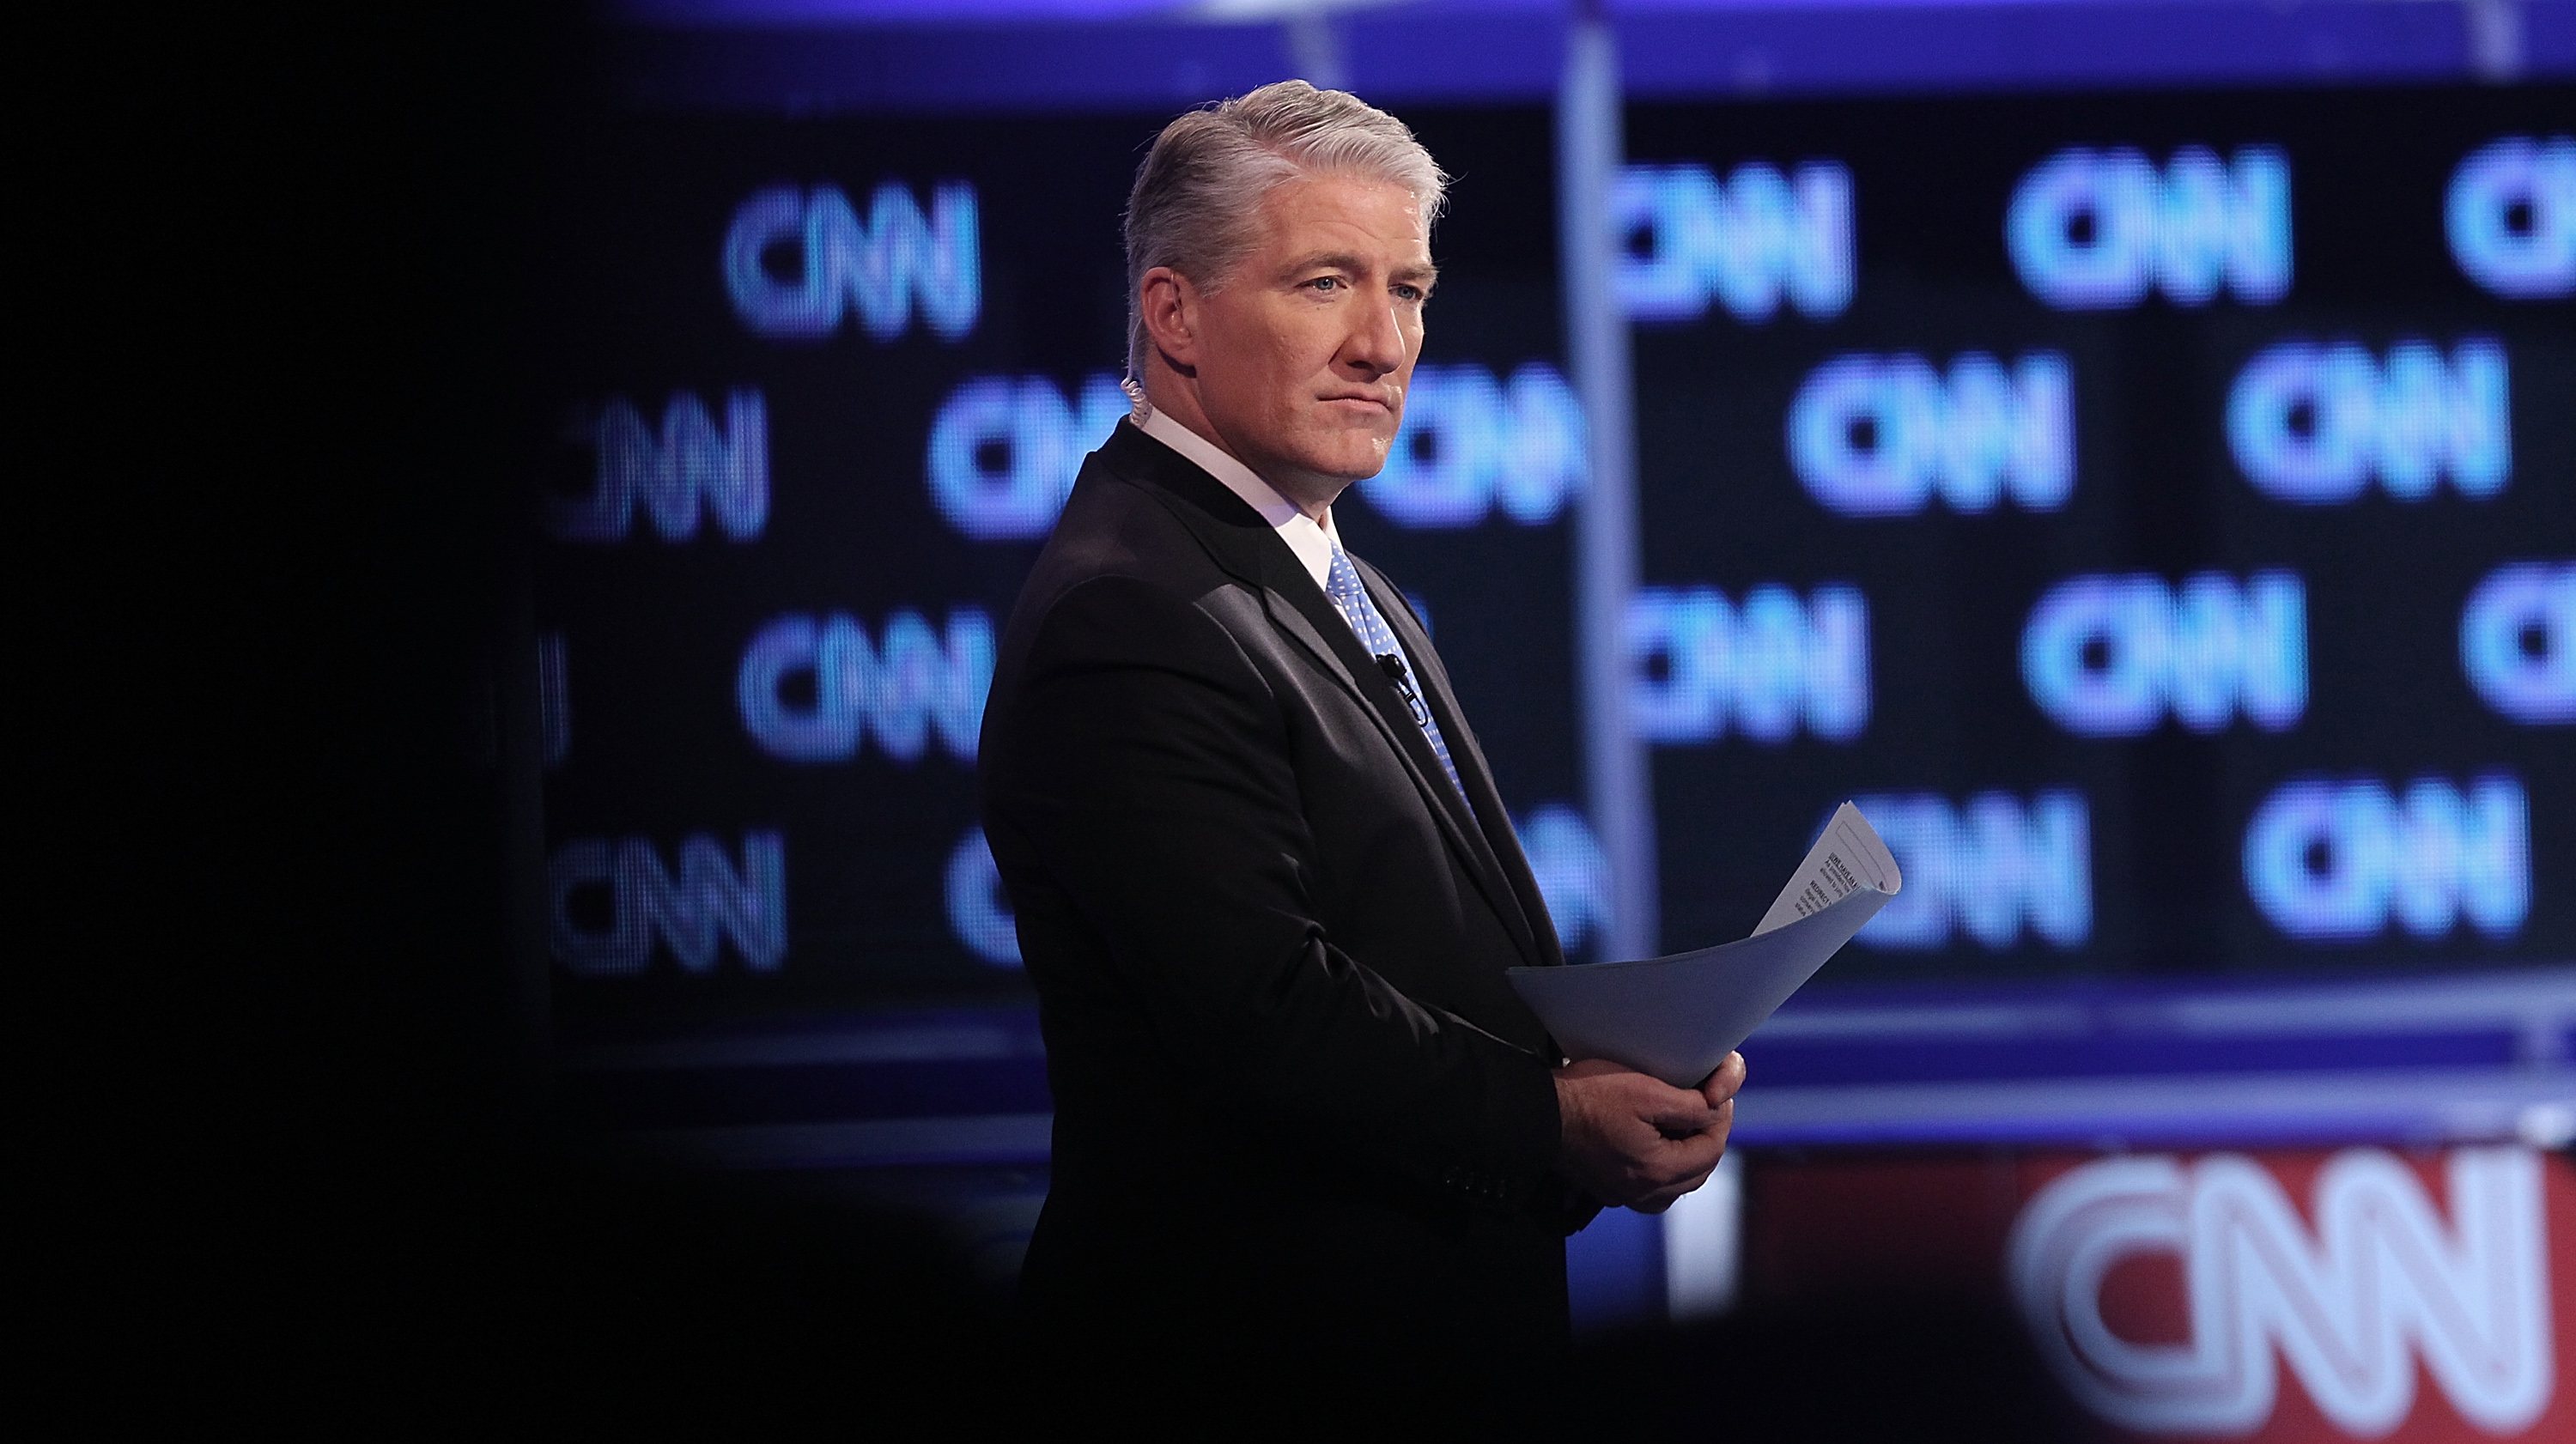 CNN And Southern Republican Leadership Conference Host GOP Presidential Debate